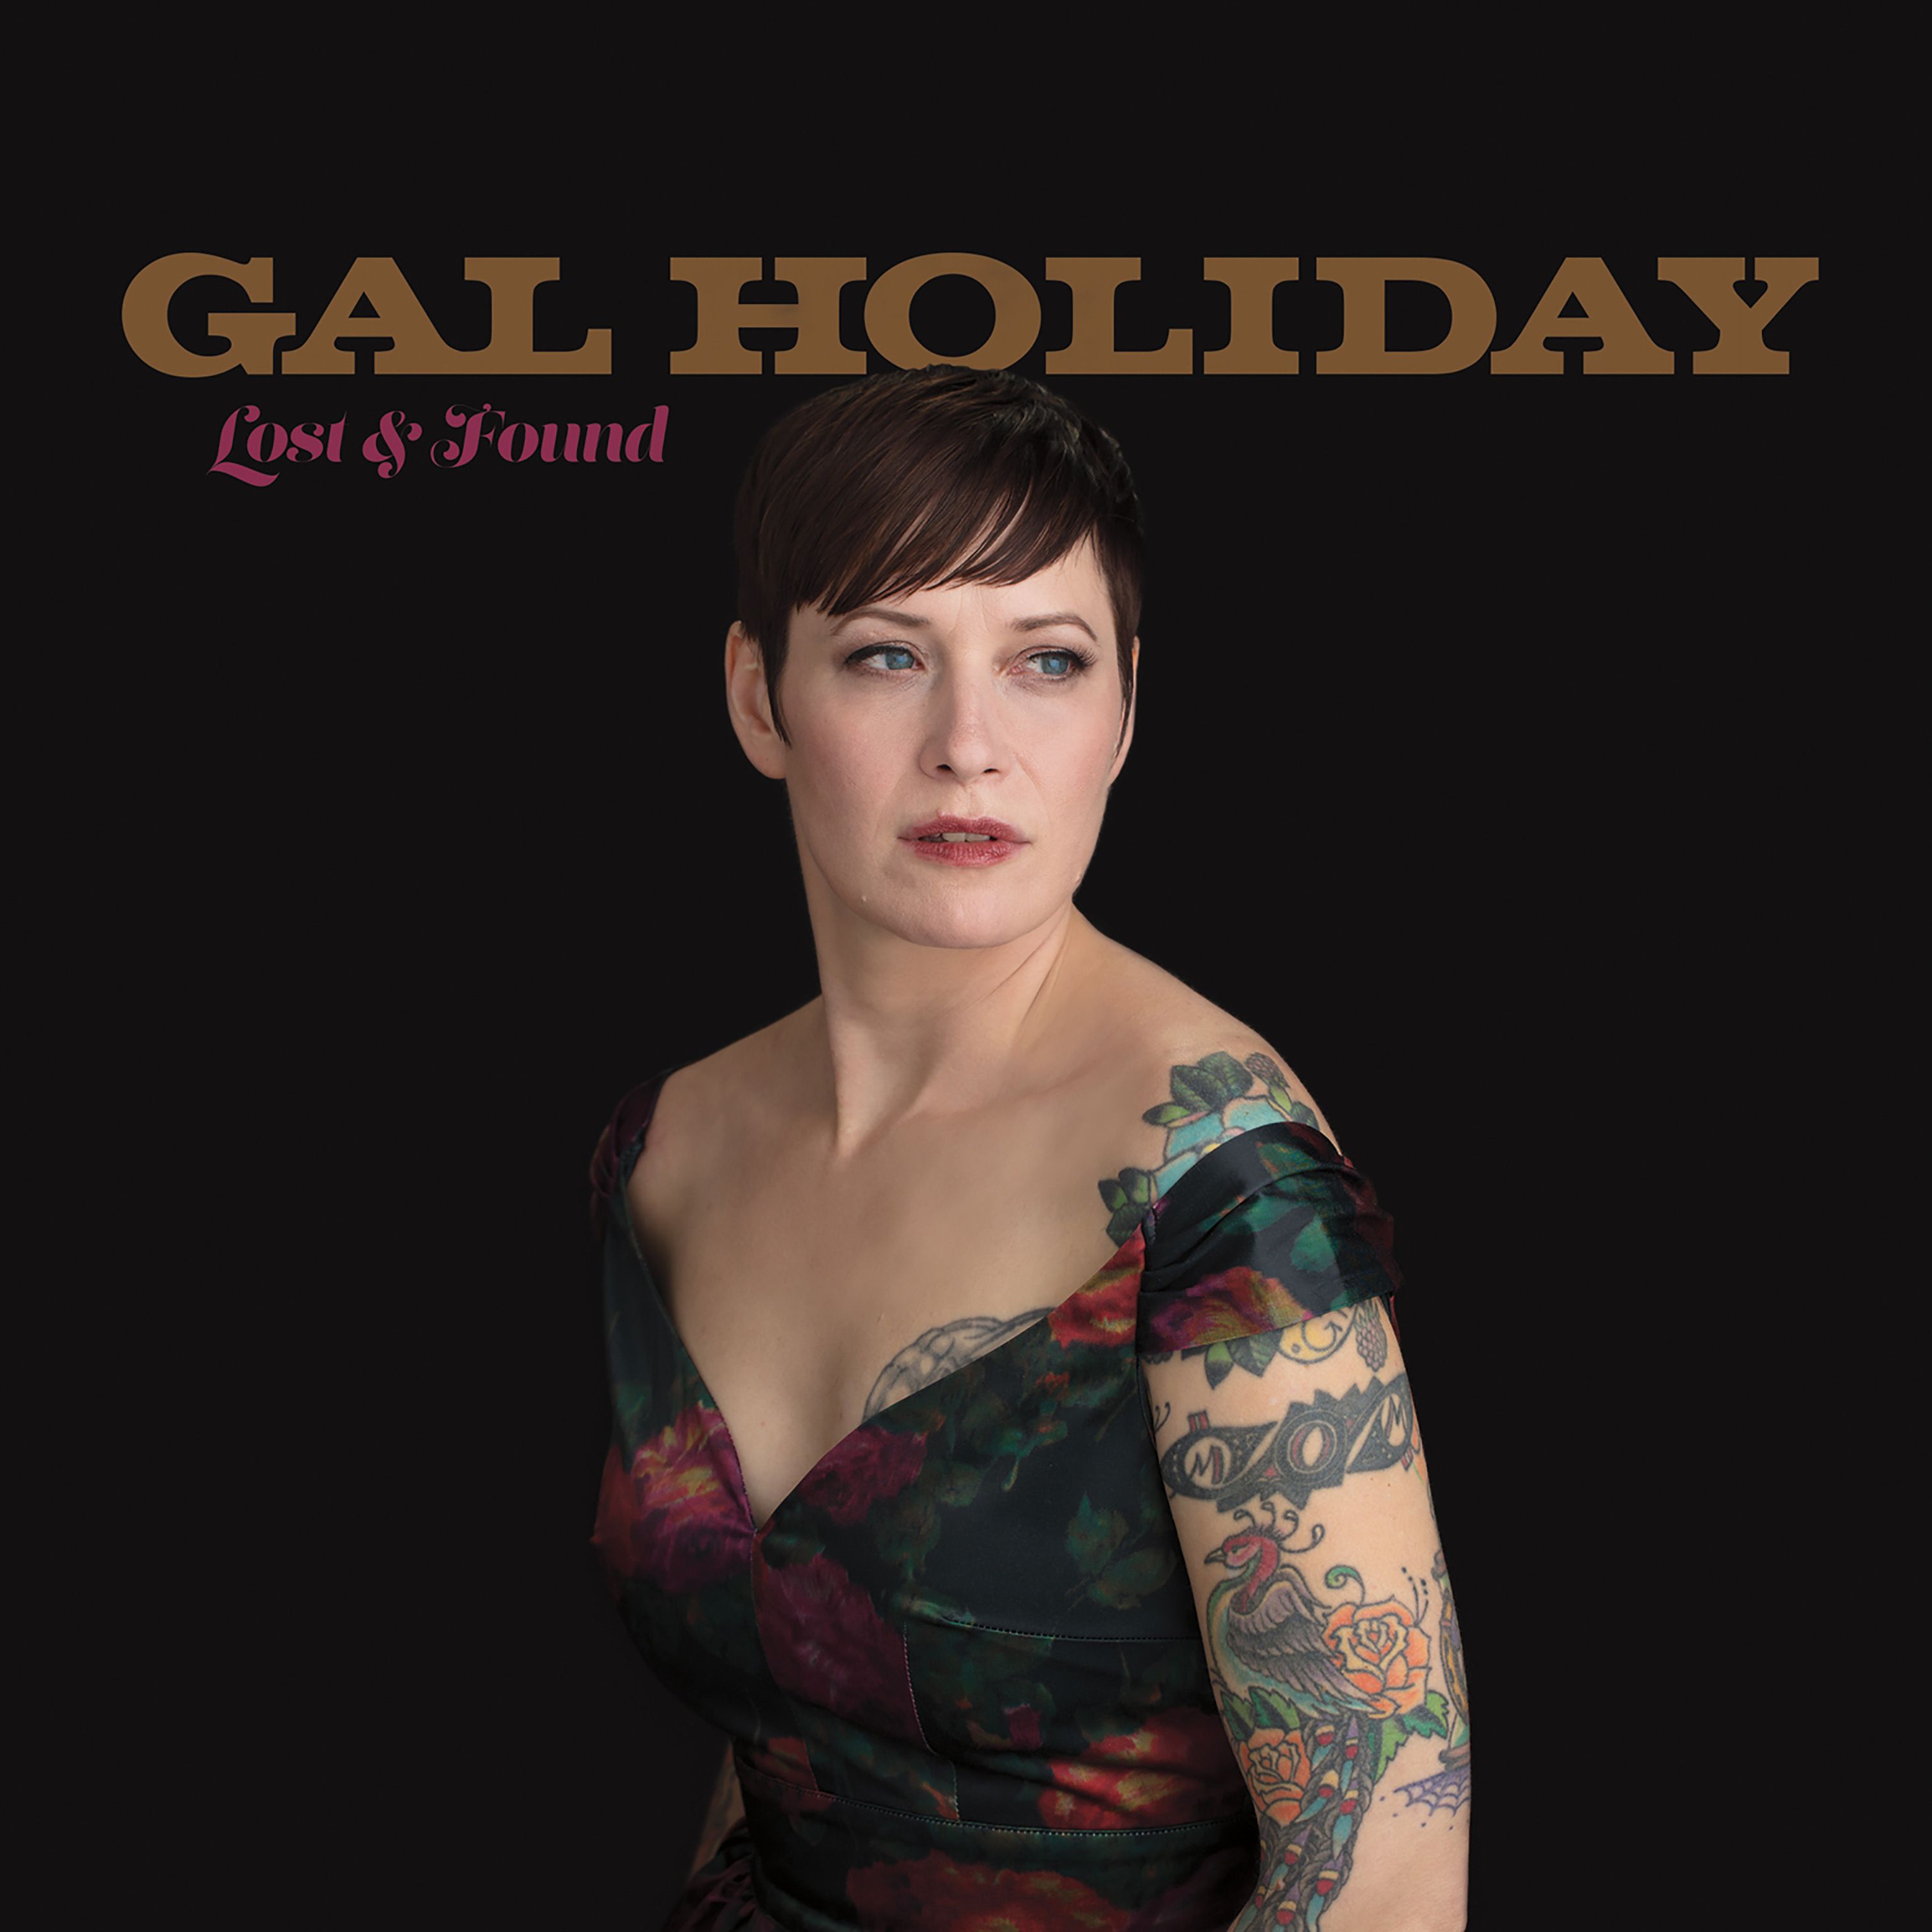 Lost & Found  Gal Holiday and the Honky Tonk Revue